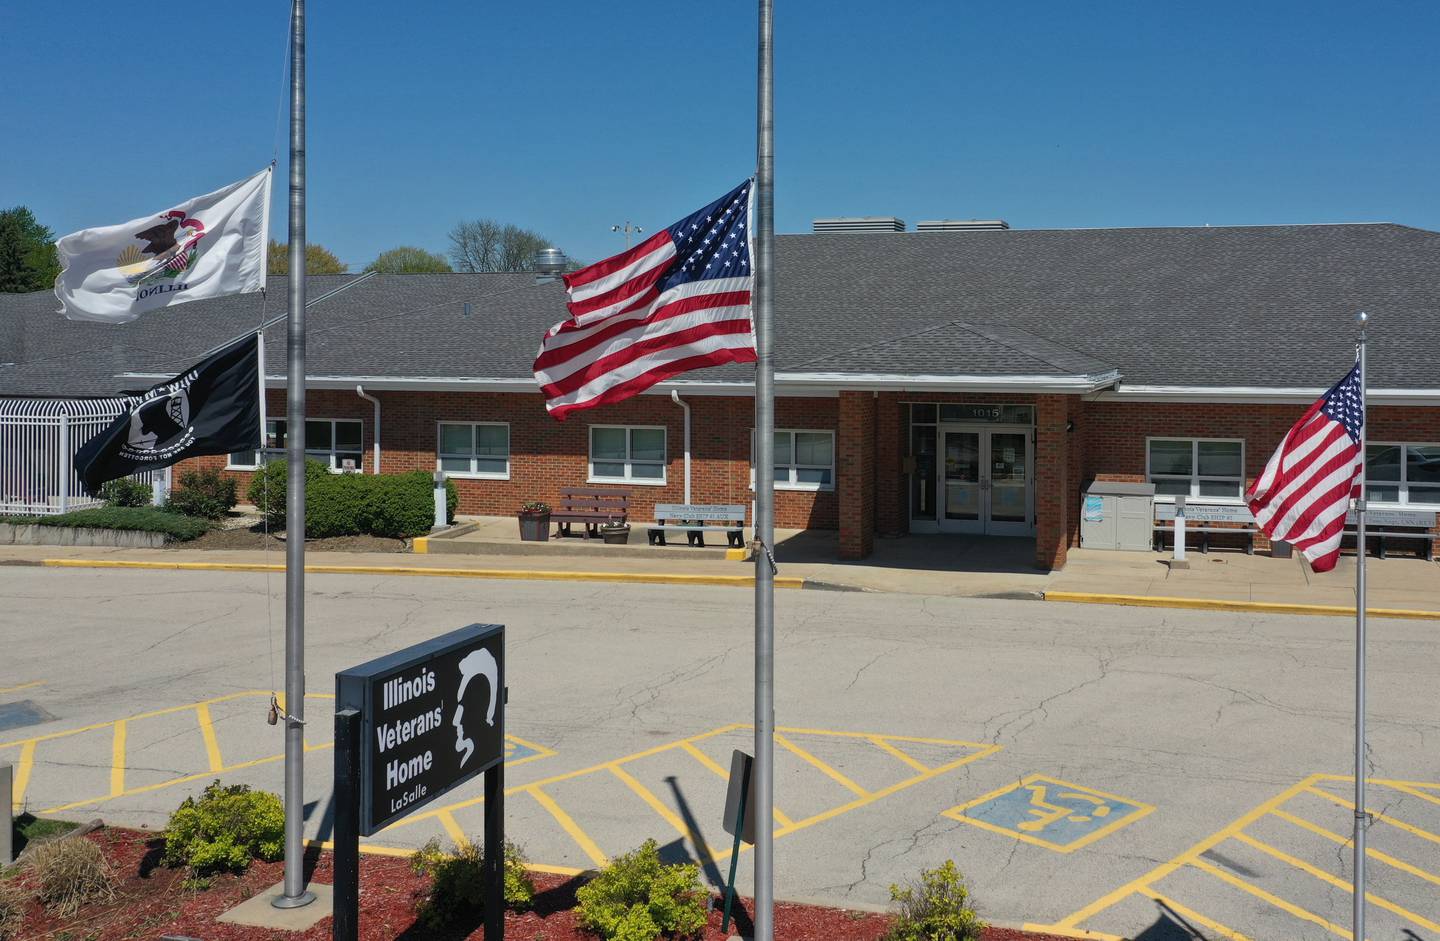 Flags blow in the wind outside the Illinois Veterans Home in La Salle